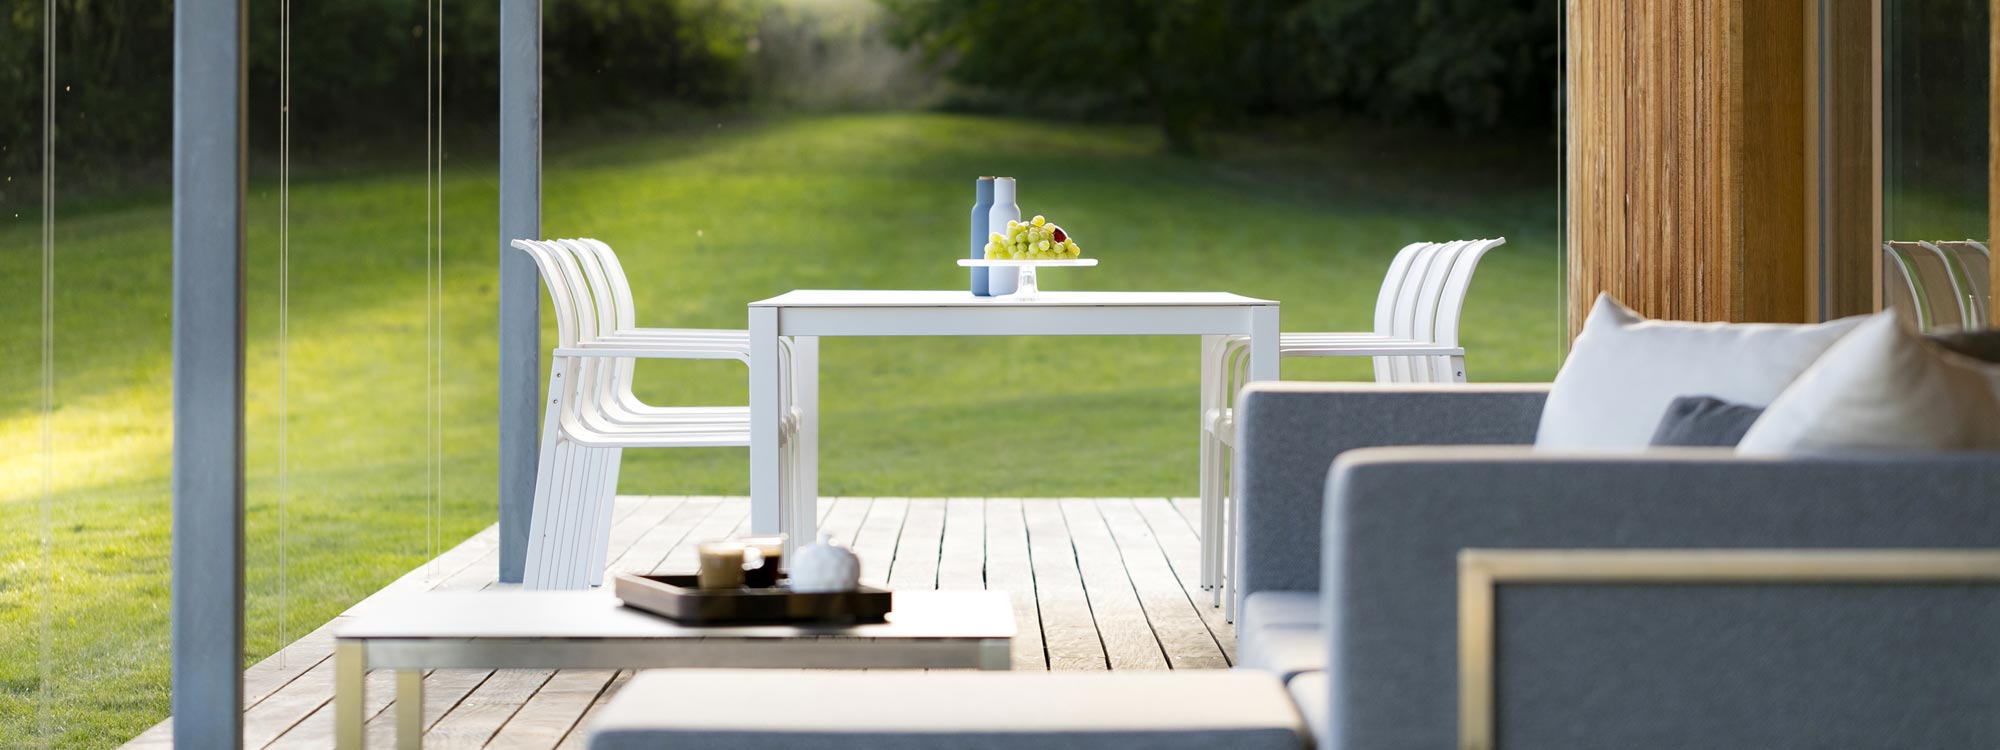 Image looking down wooden decked veranda with Lotus garden sofa and Puro outdoor dining furniture by Todus